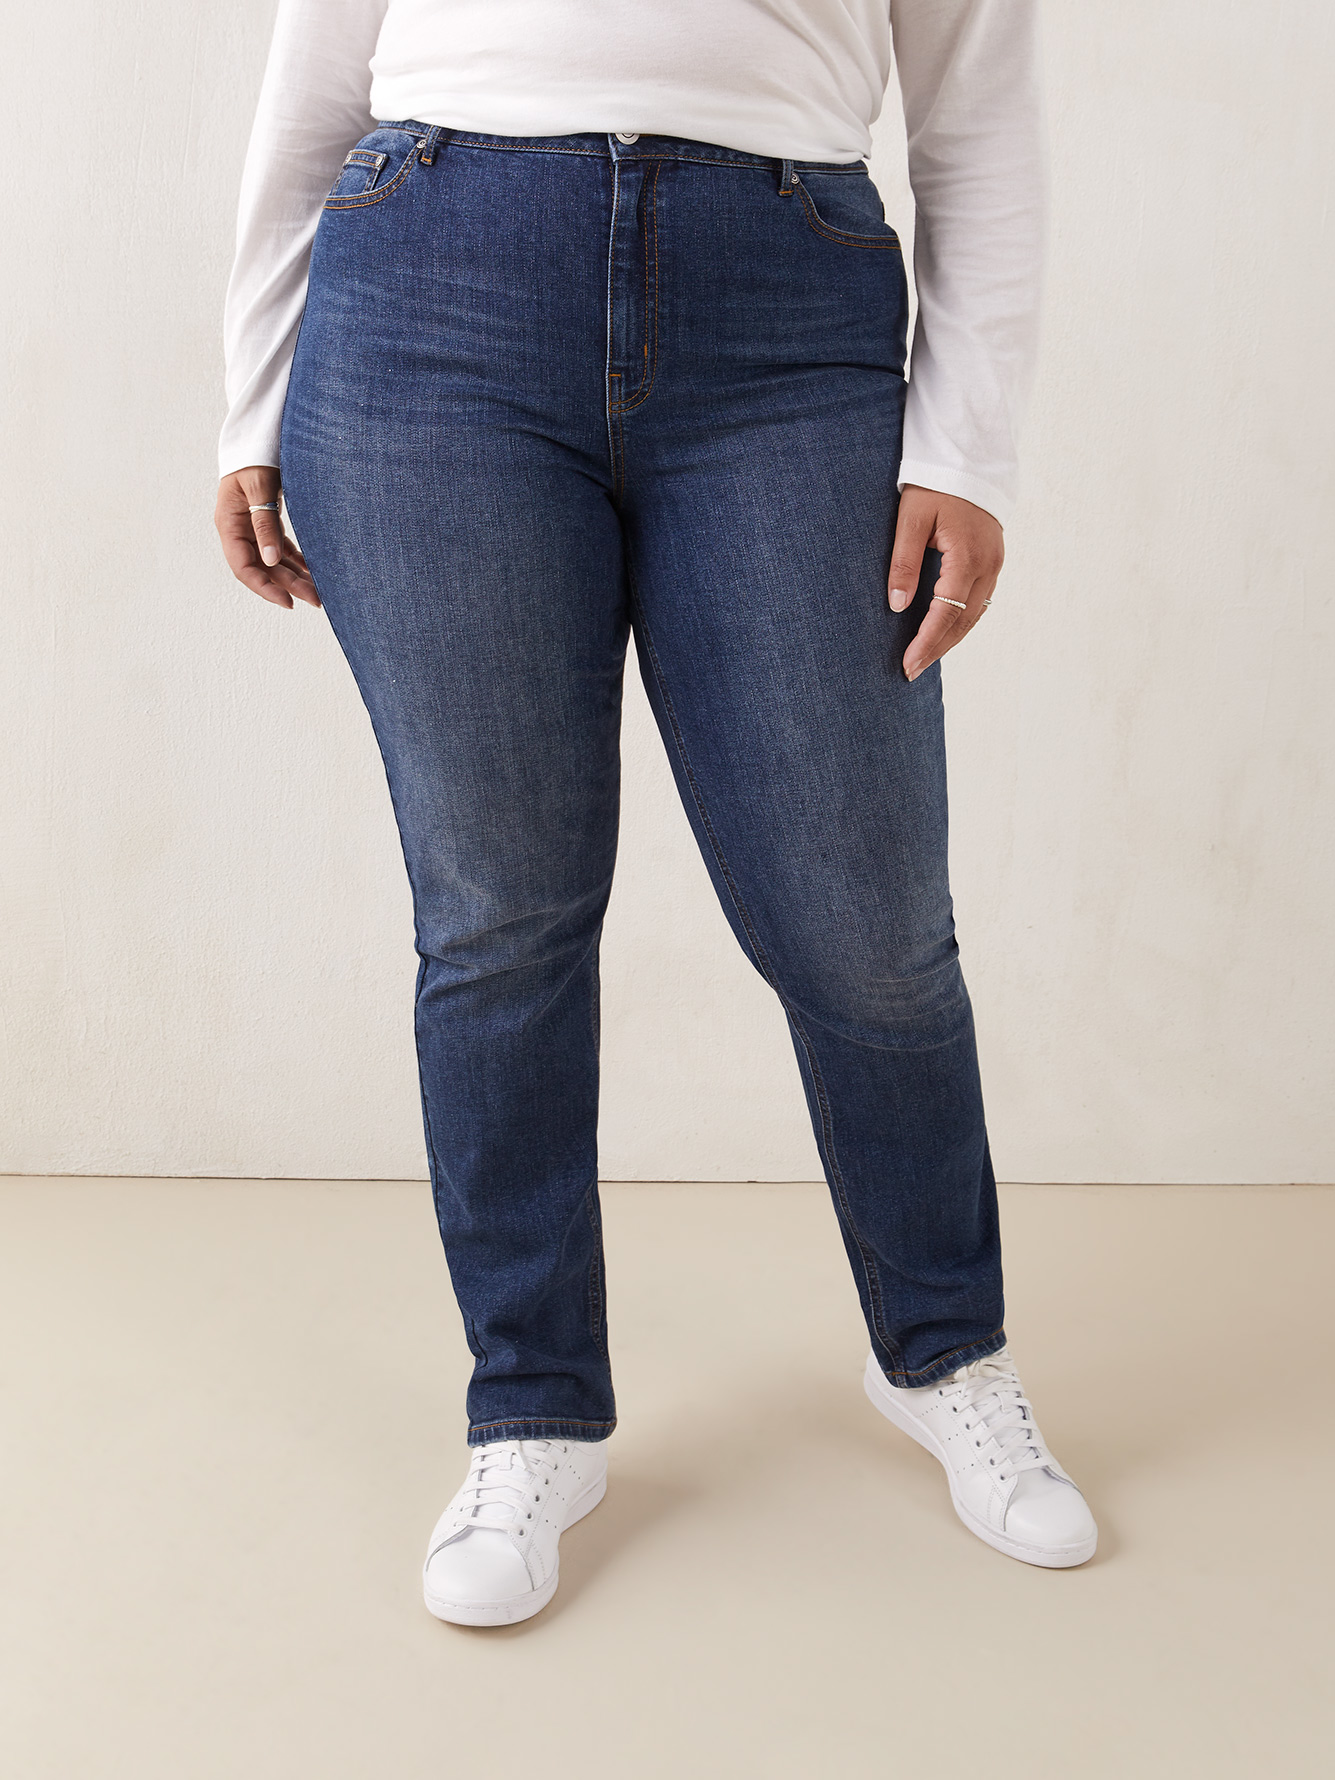 A pair of dark blue straight jeans from Penningtons